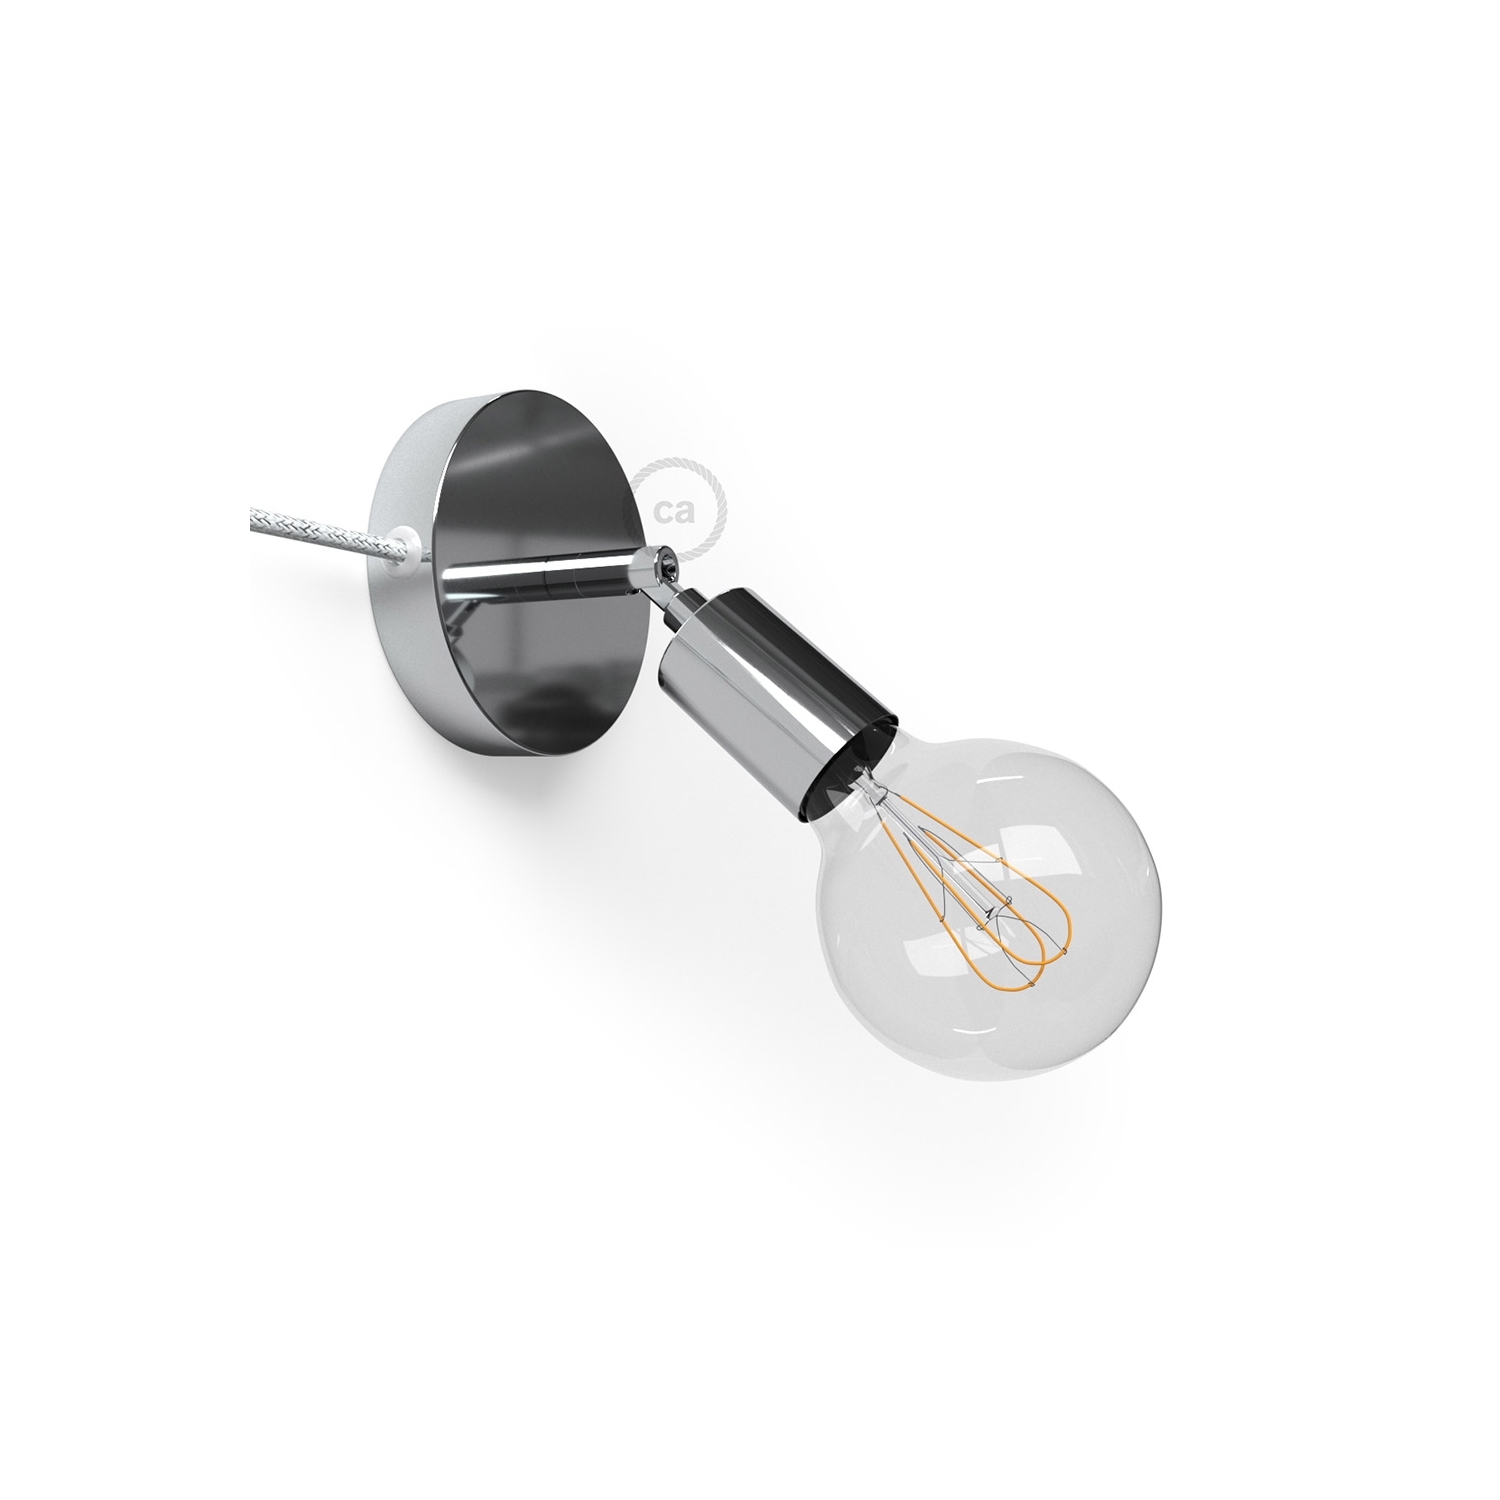 Spostaluce Metallo 90°, the chromed adjustable light source with fabric cable and side holes